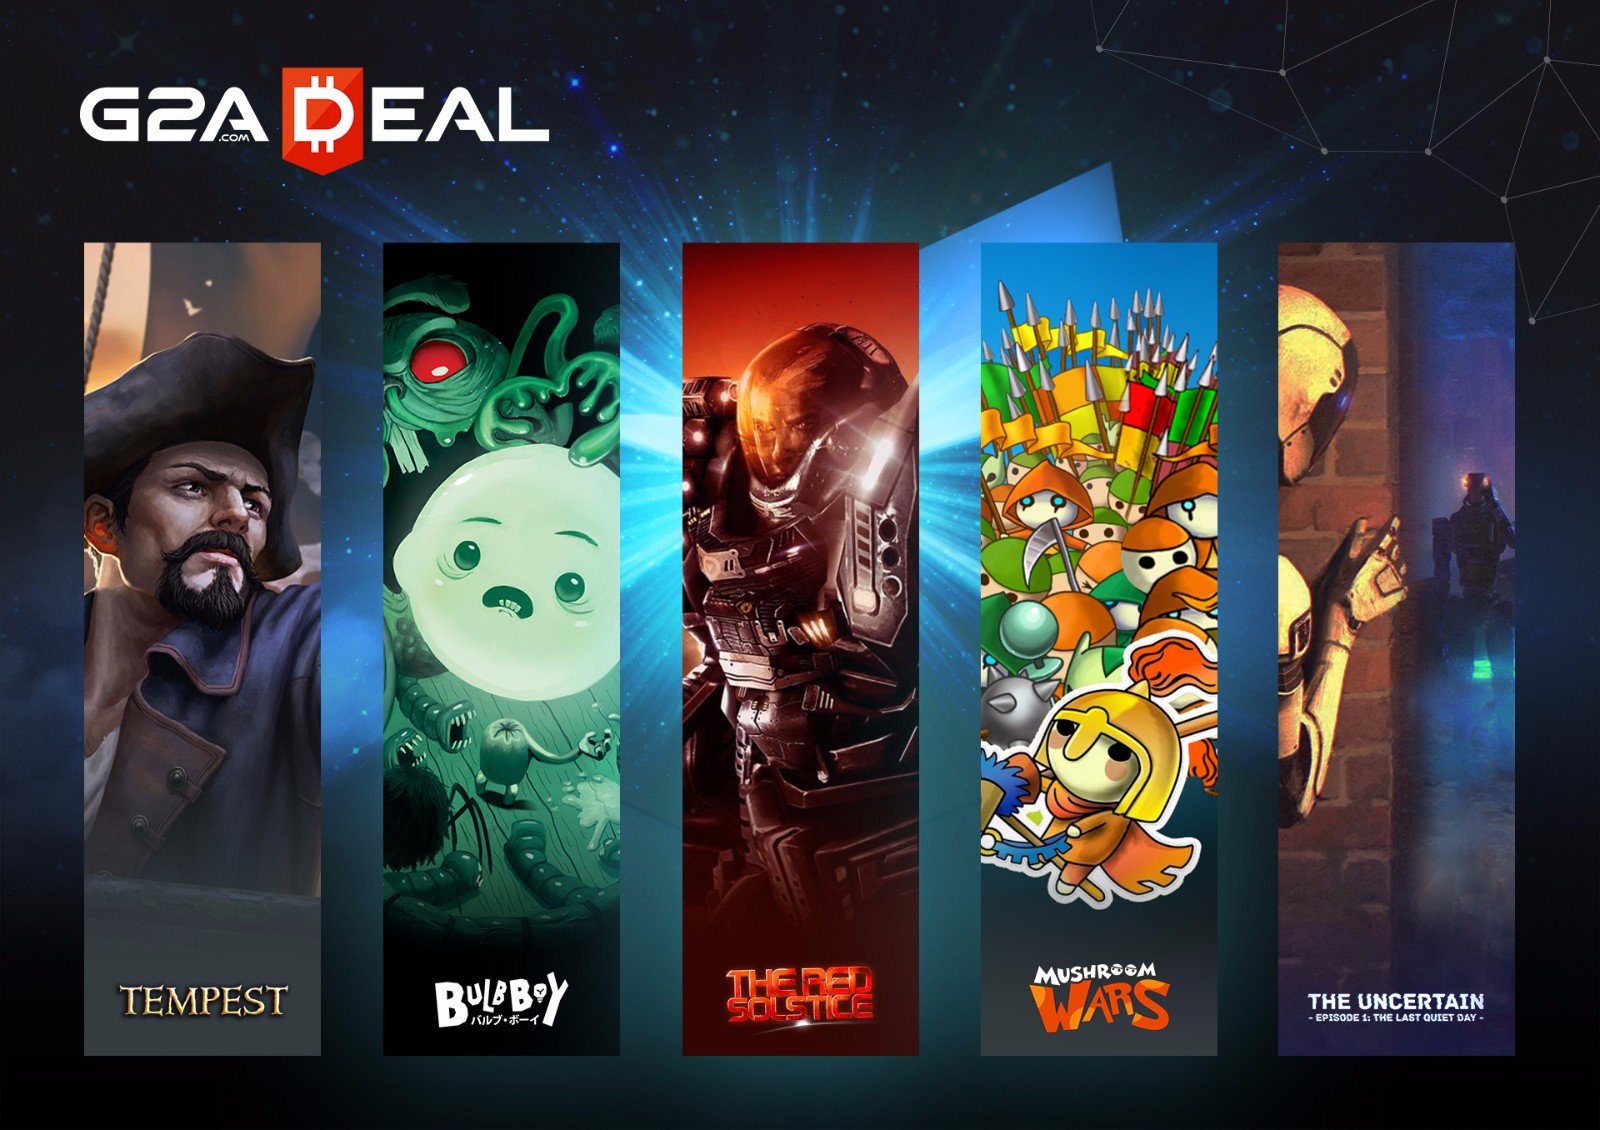 The third edition of G2A Deal kicks off on May 11th